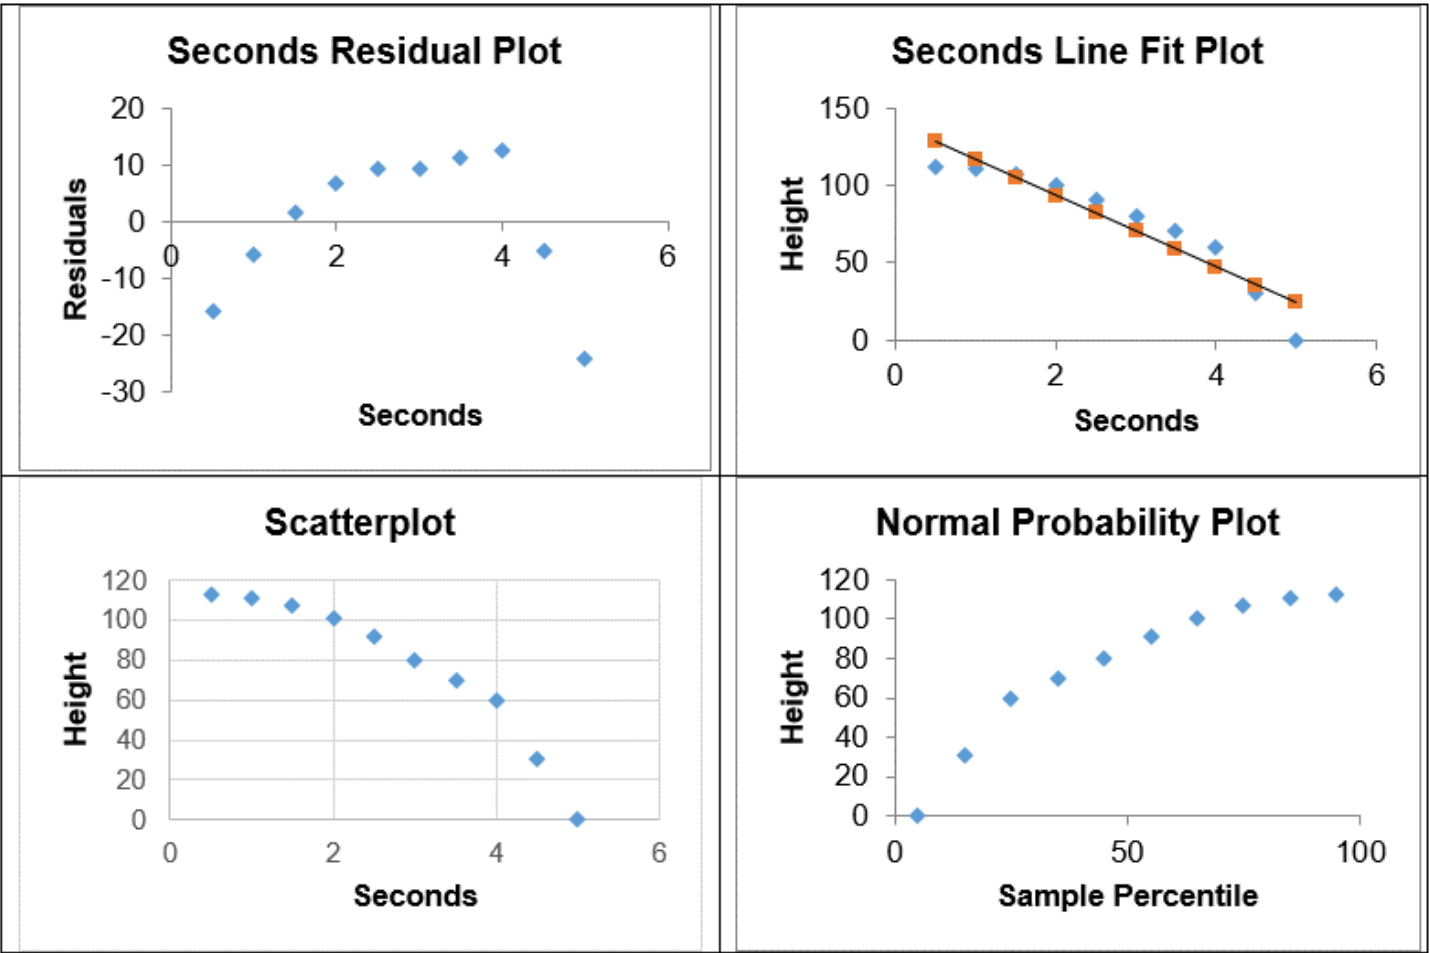 A seconds residual plot, seconds line fit plot, scatterplot, and normal probability plot for the given data.